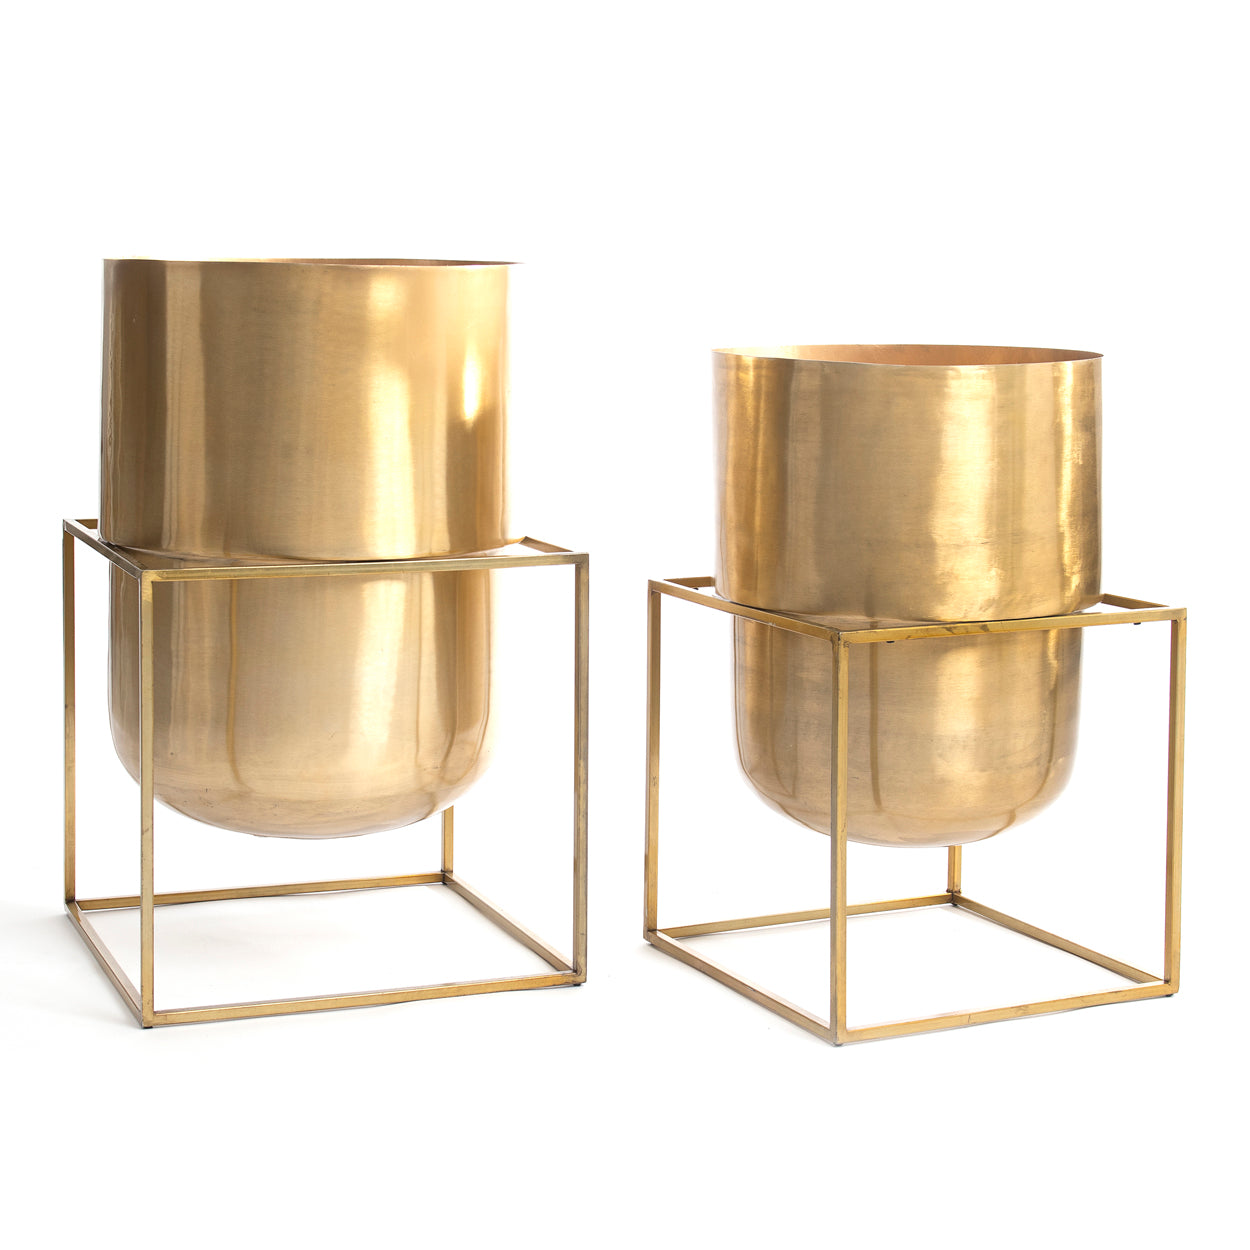 THE SQUARE BOX Brass Planter two pieces